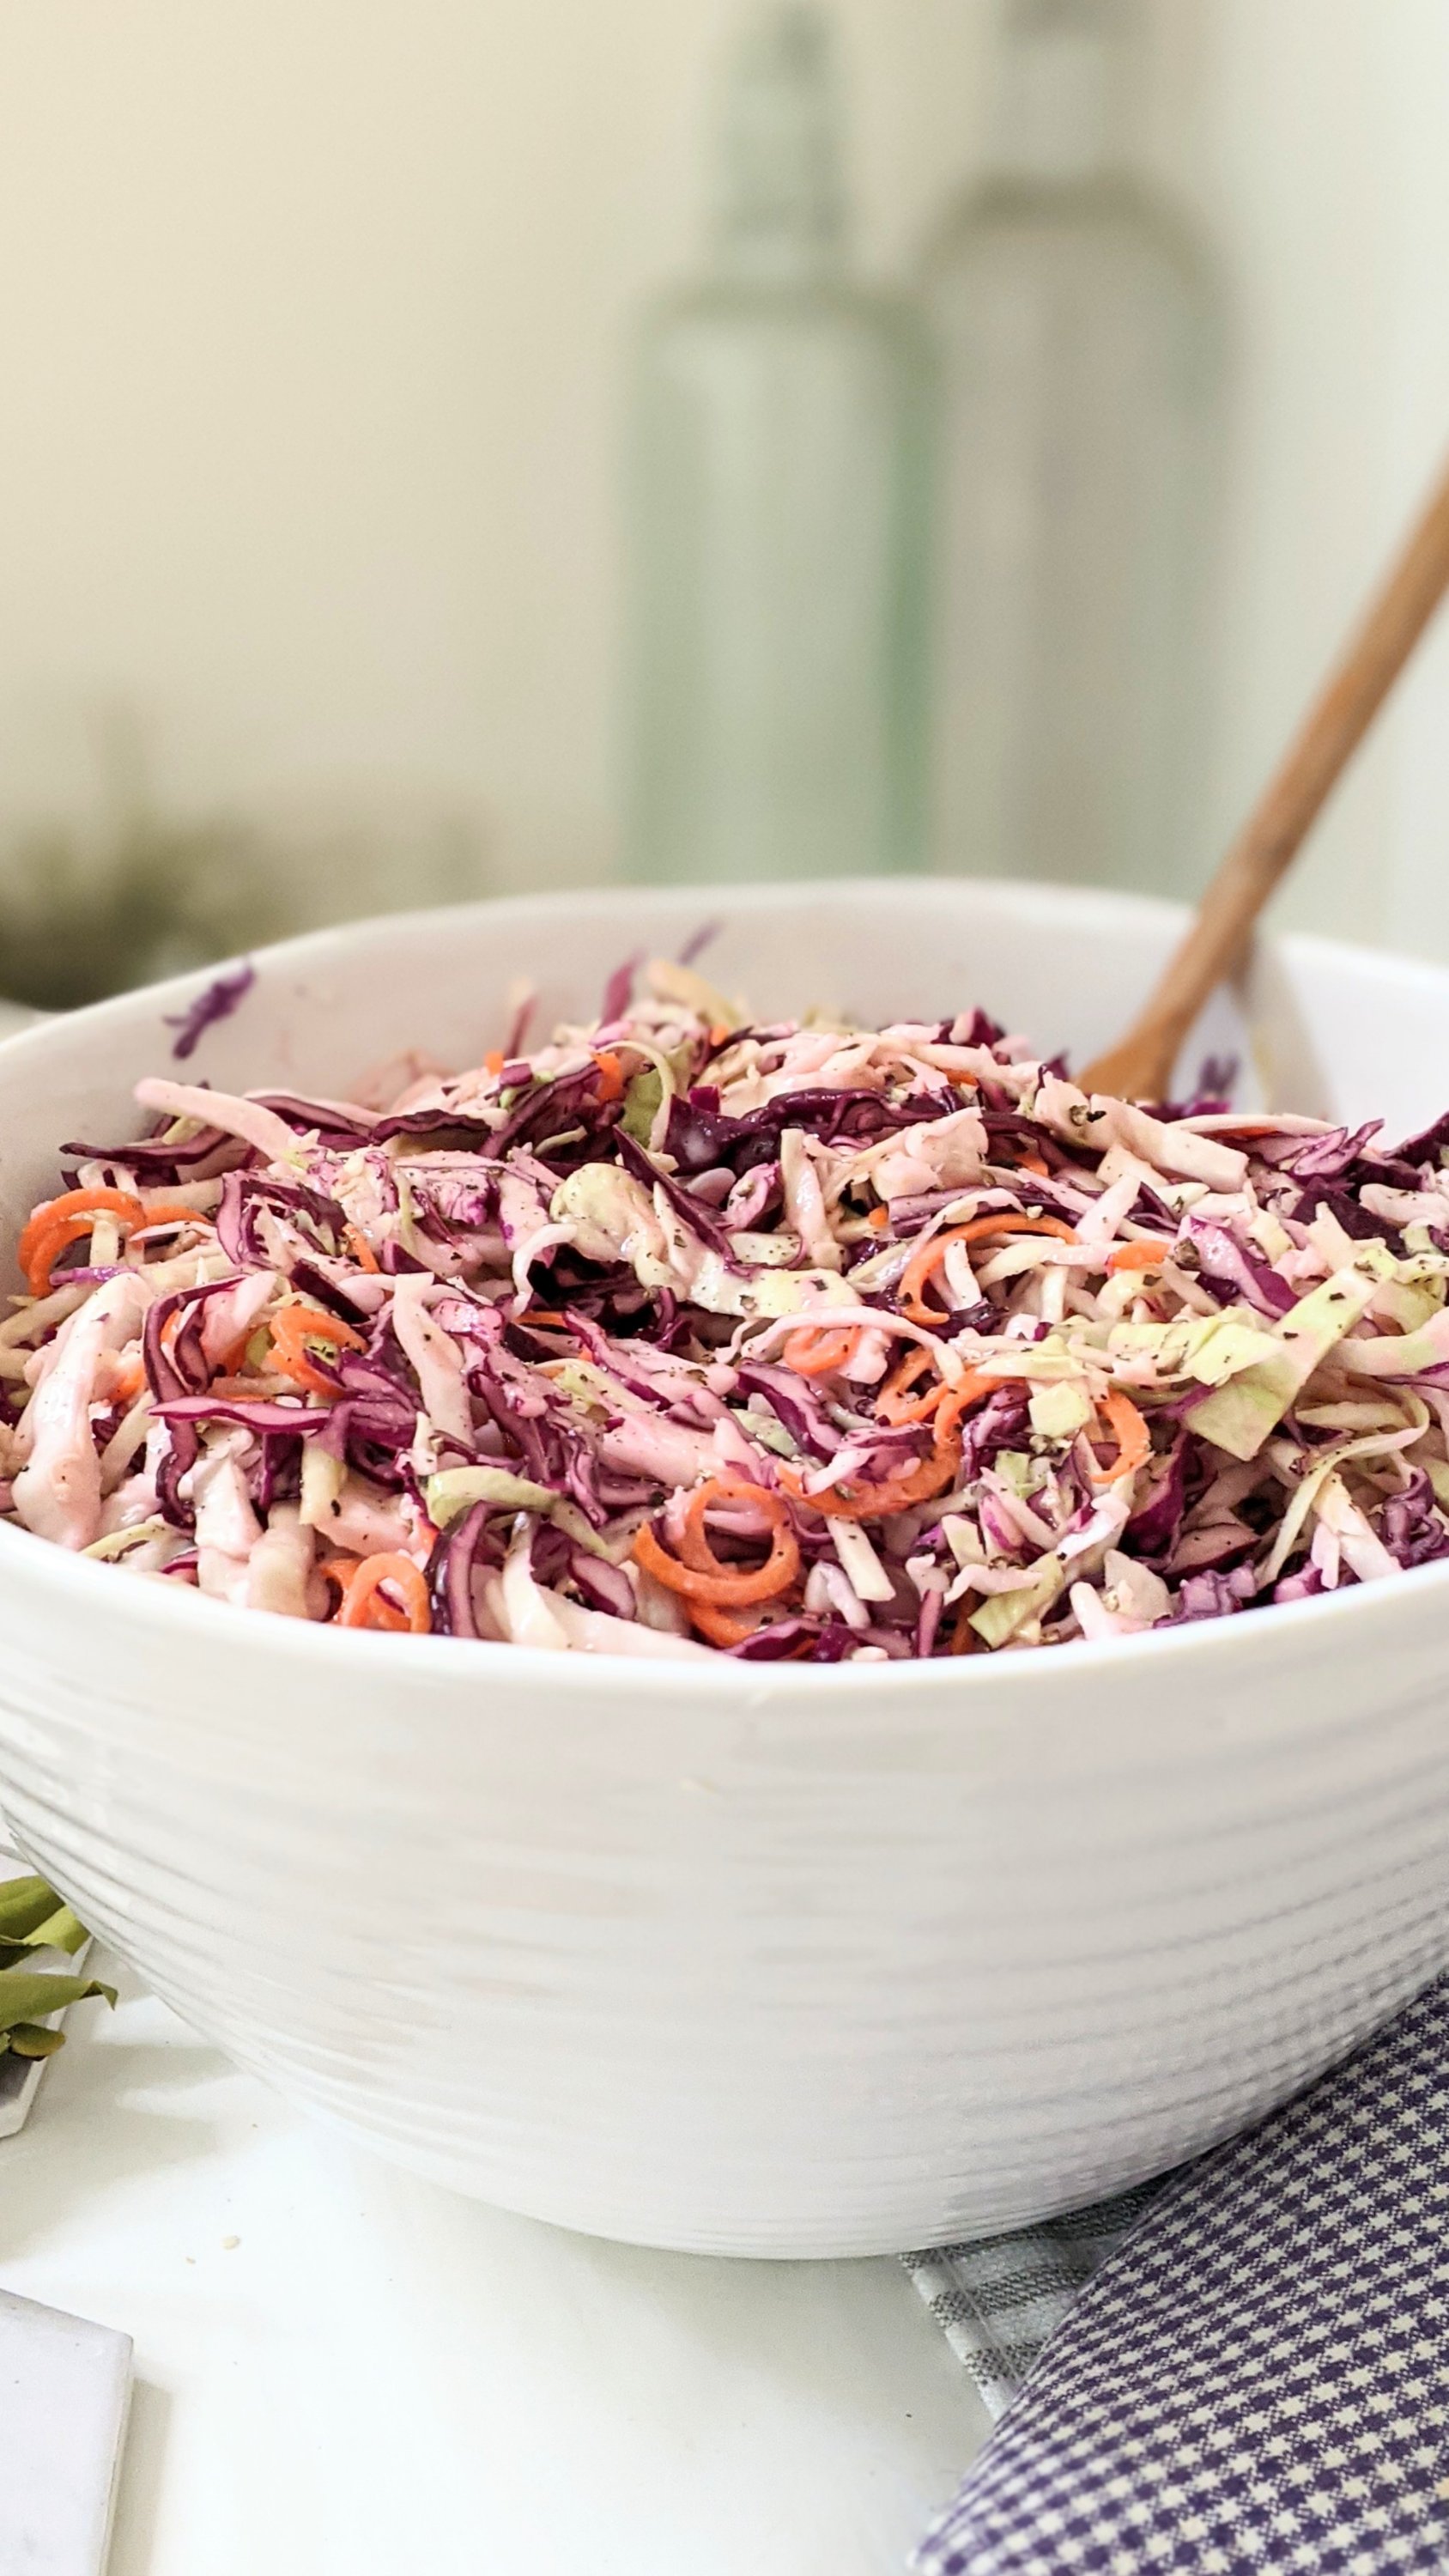 dairy free coleslaw recipe with red cabbage salad for summer bbq picnic side dishes gluten free potluck salads healthy recipes with red cabbage coleslaw